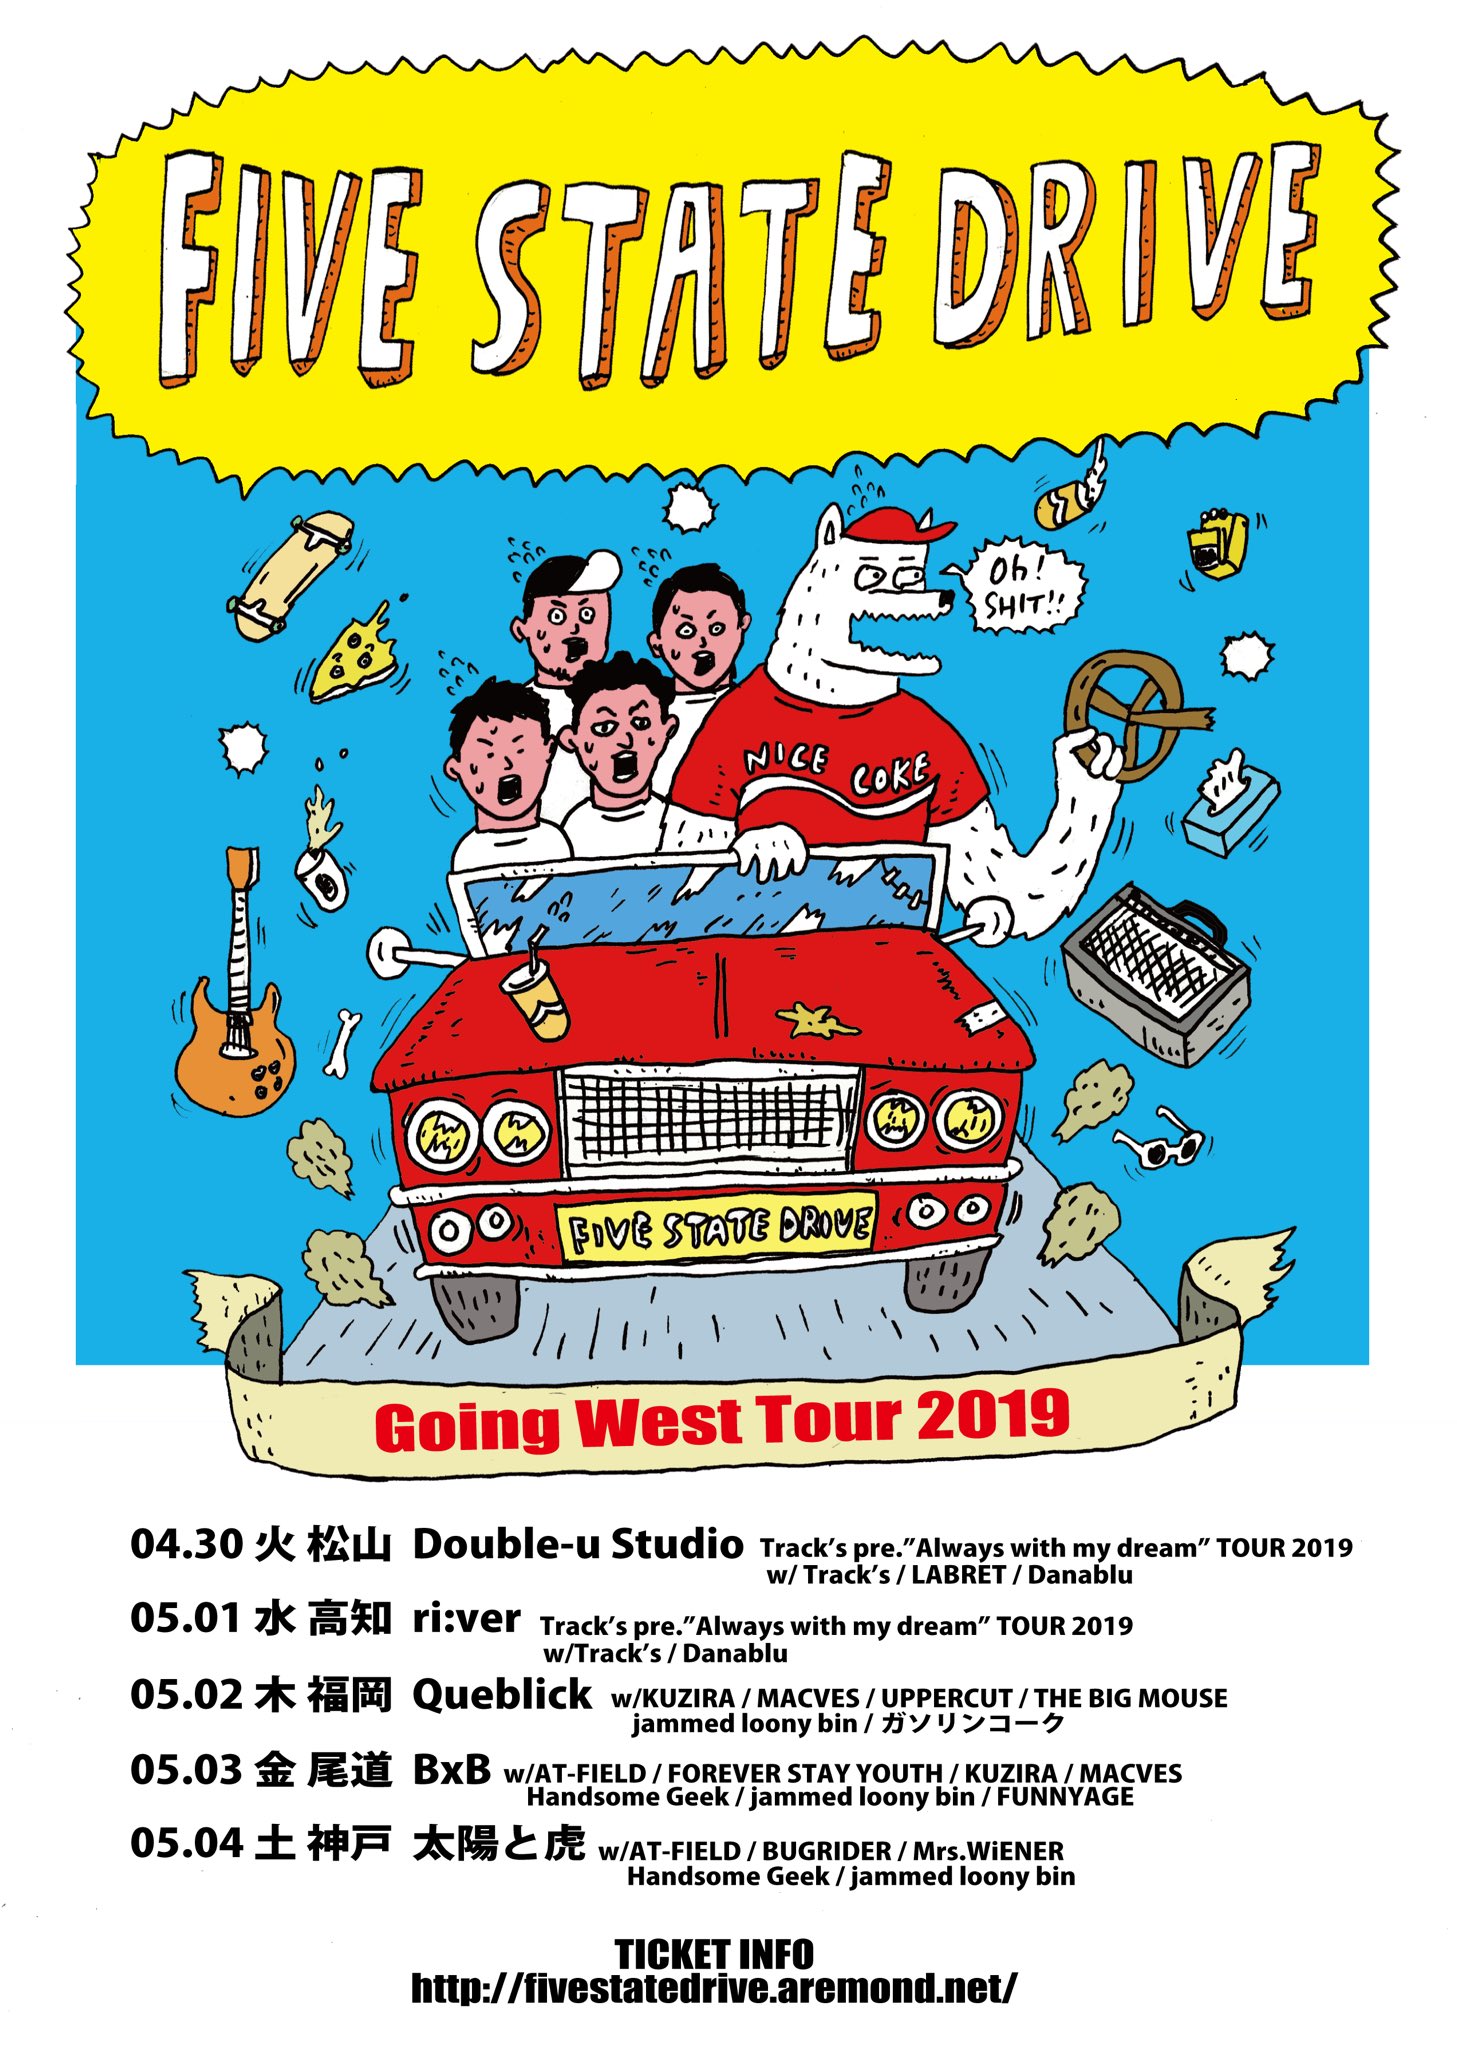 Five State Drive “Going West Tour”